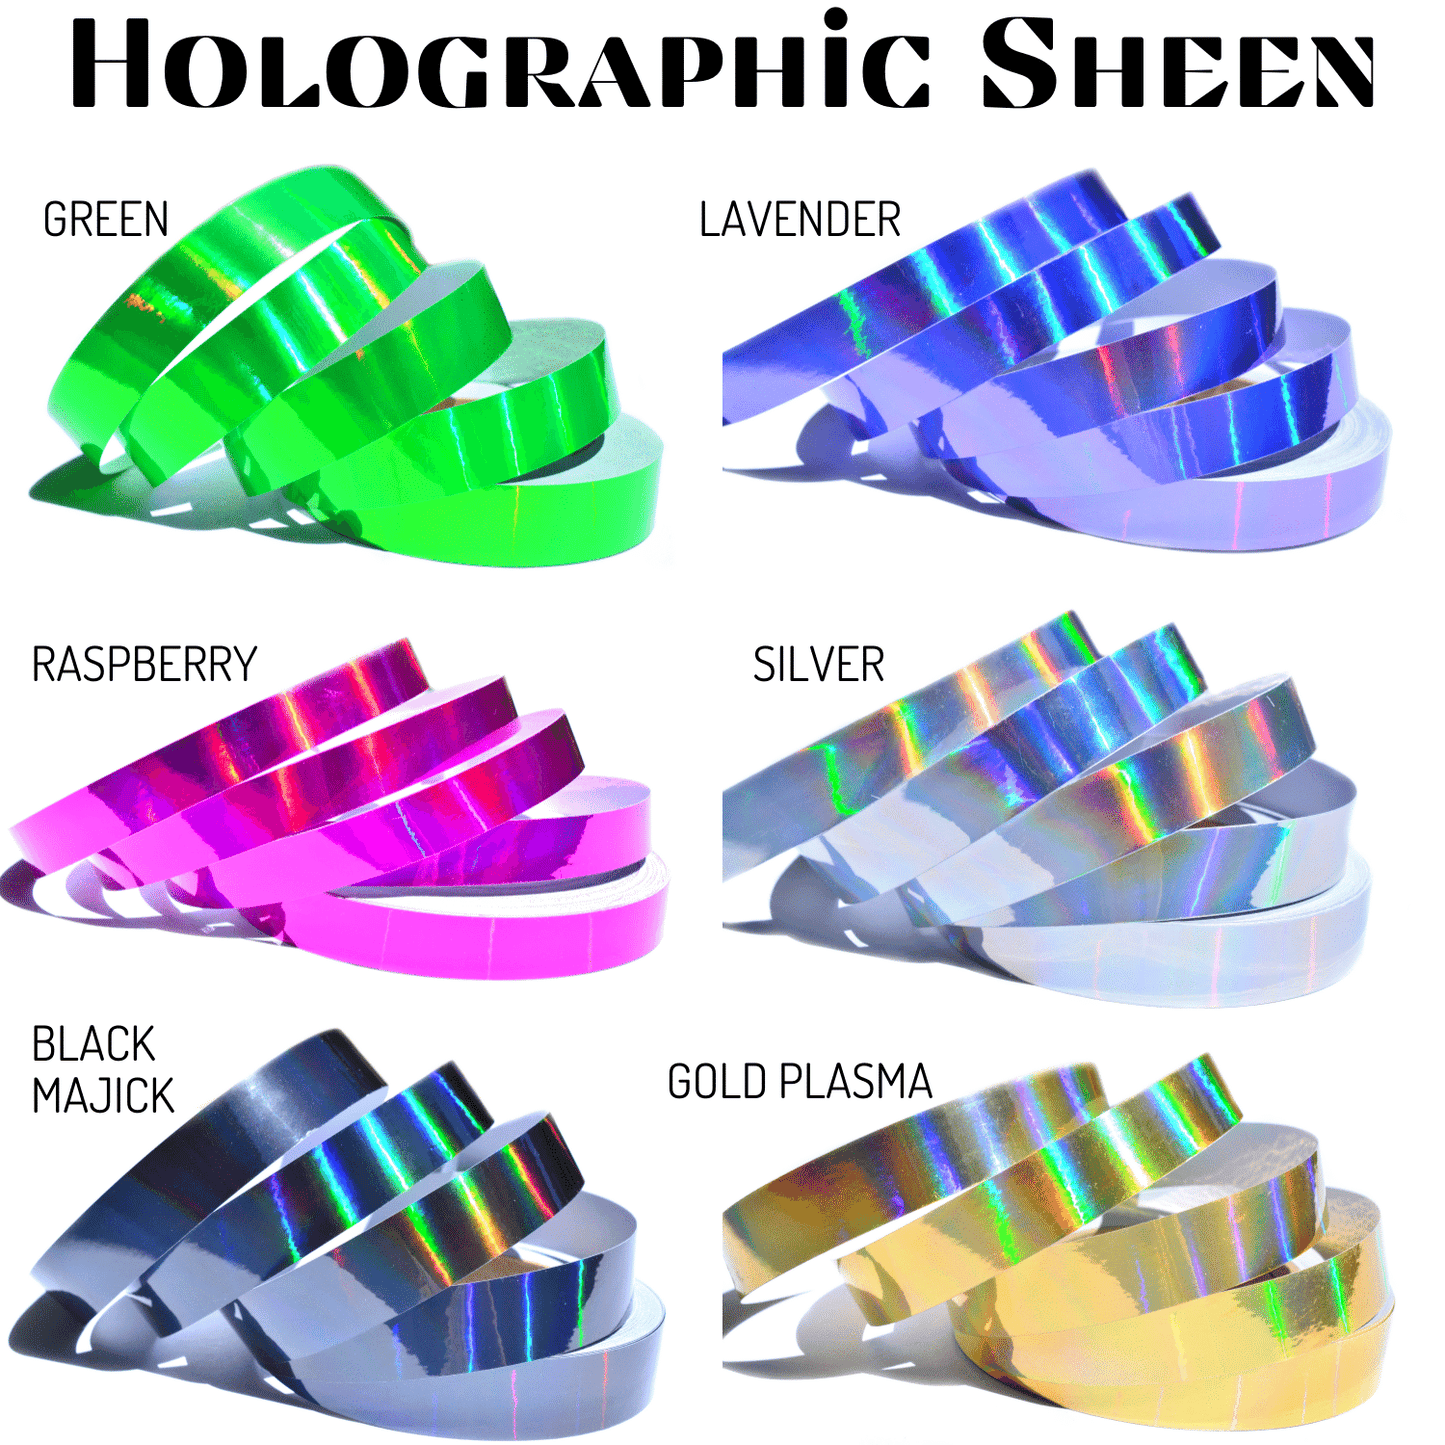 Holographic Taped Beginner Hoop - Holographic Tape w/ Gaffer Grip Tape